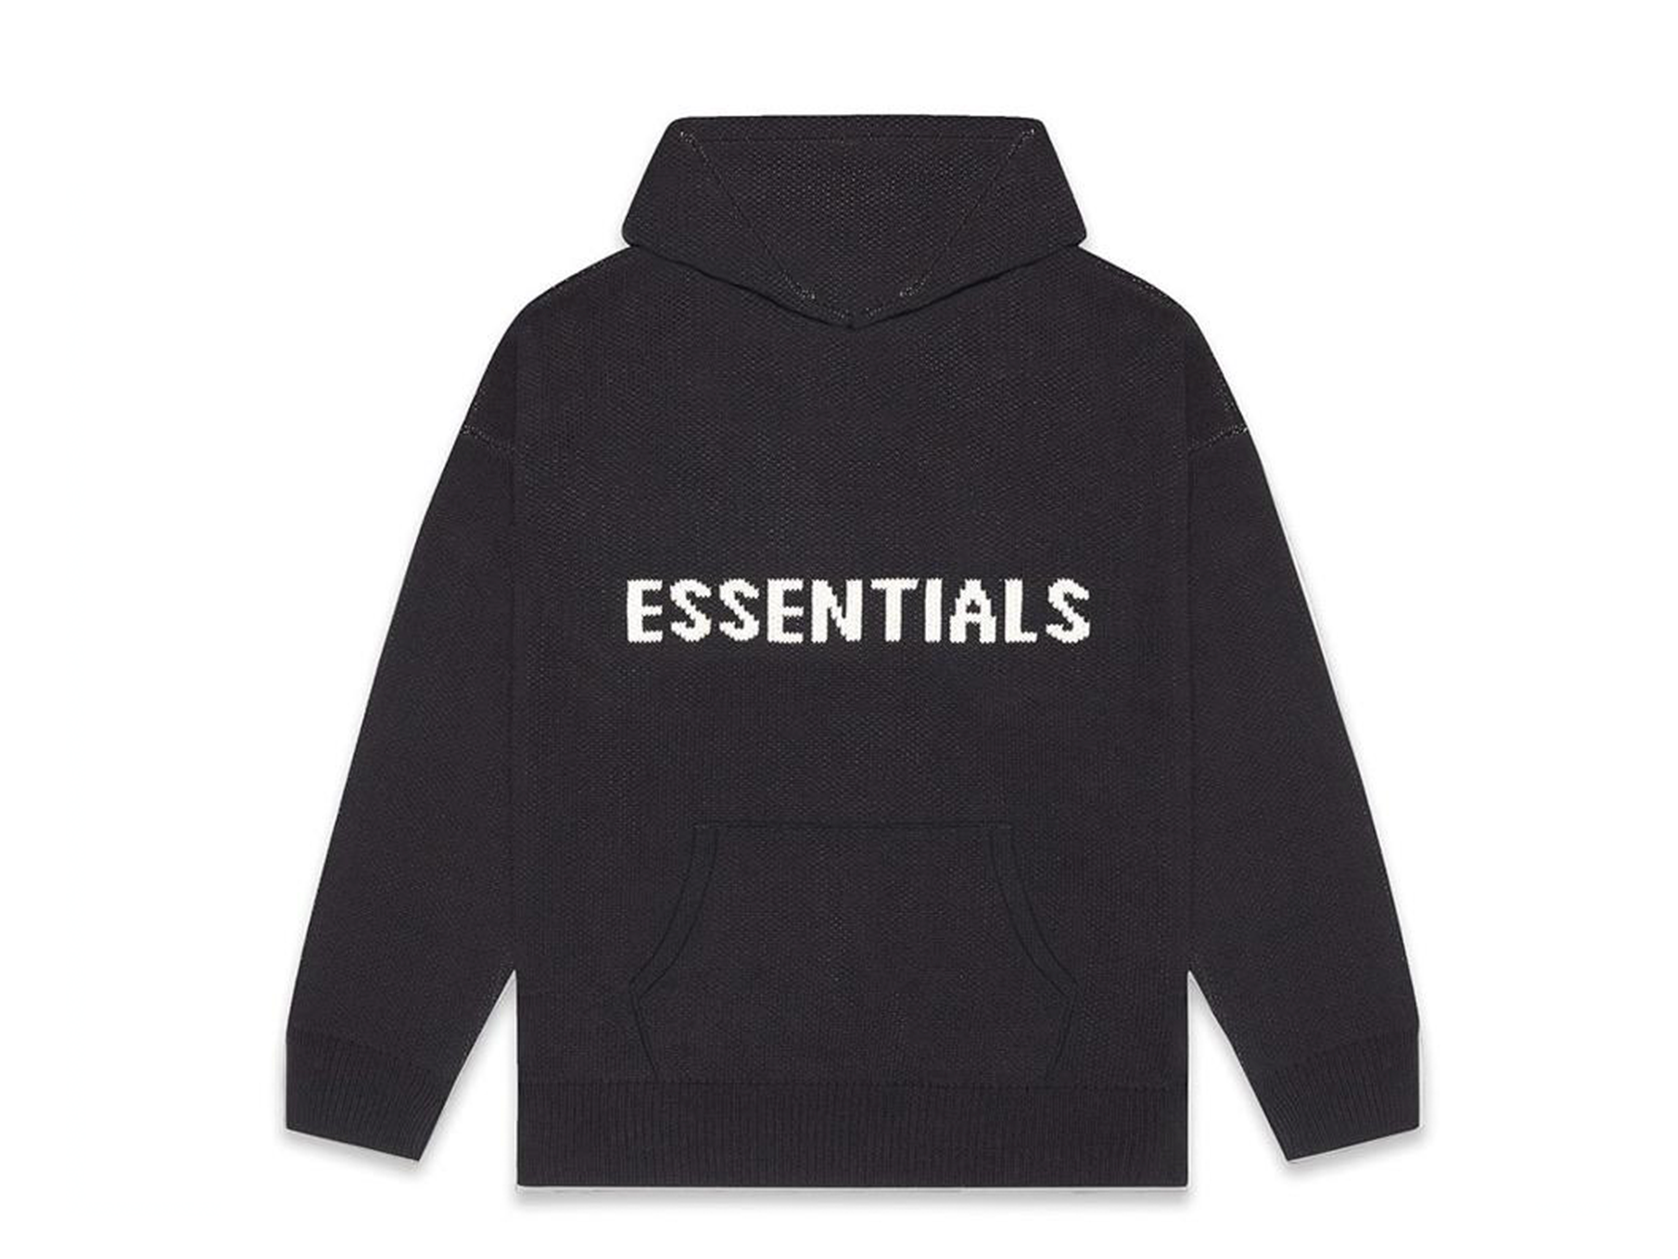 Double Boxed hoodie 299.99 FEAR OF GOD ESSENTIALS PULLOVER KNIT HOODIE BLACK Double Boxed